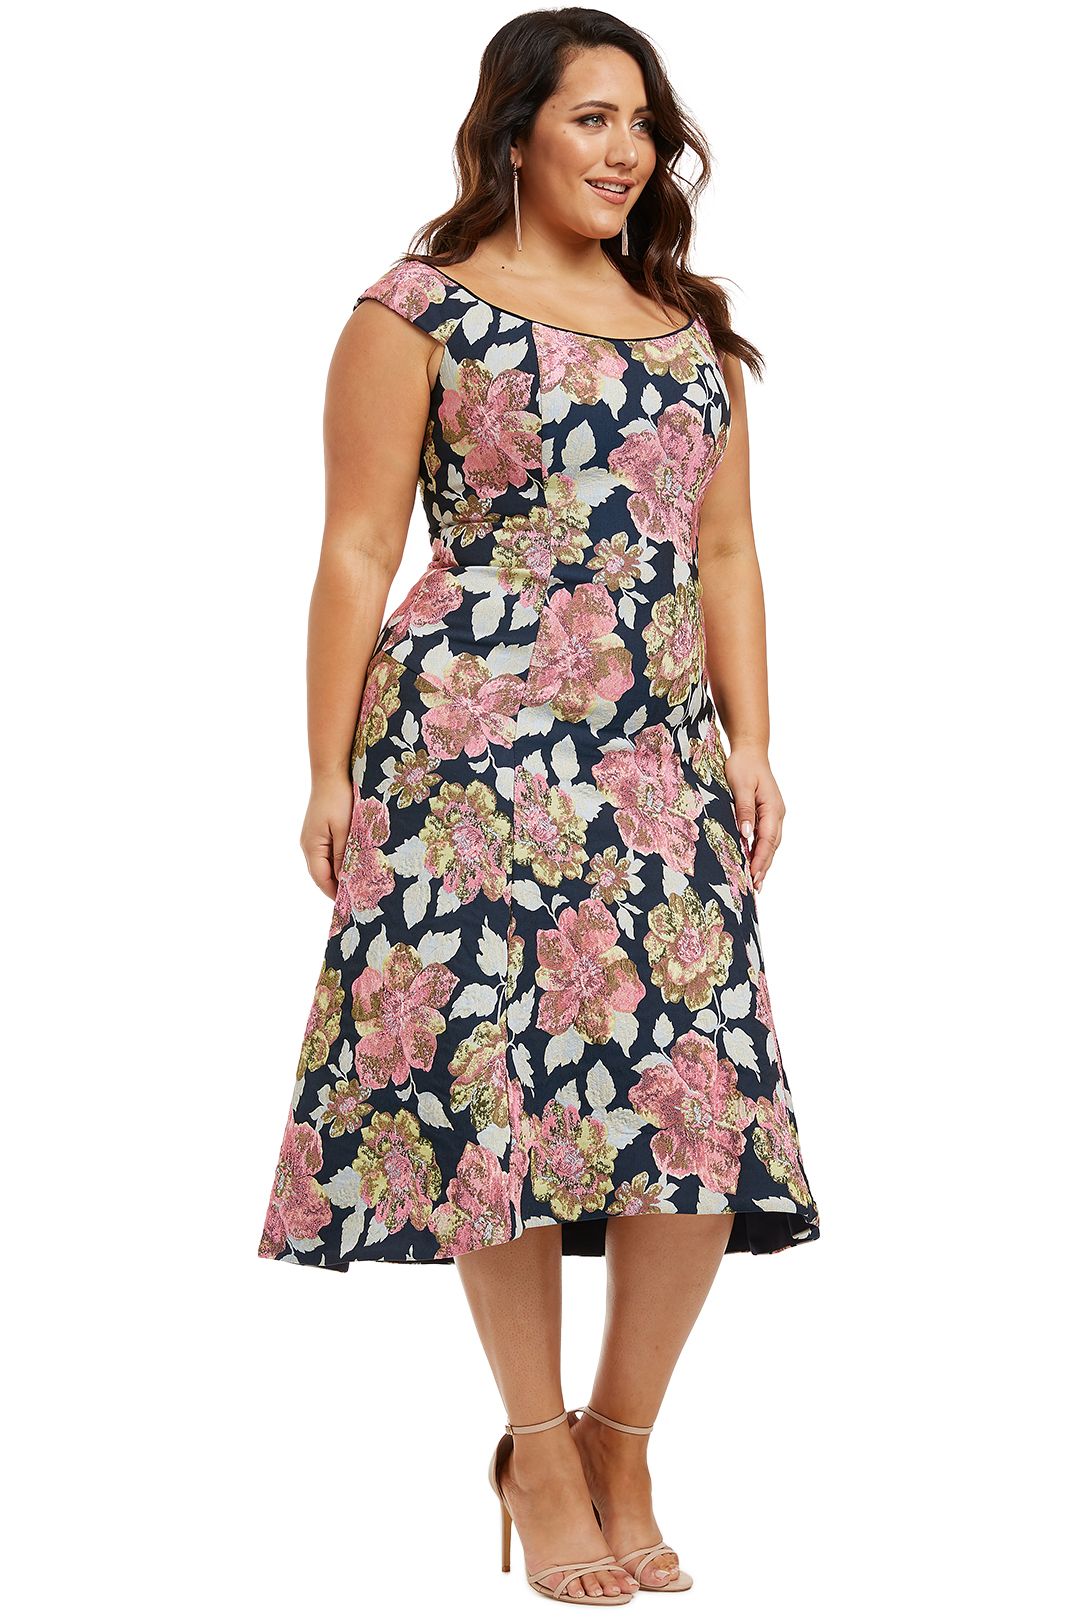 Beatrice Midi A-Line Dress in Floral by Moss and Spy for Hire | GlamCorner